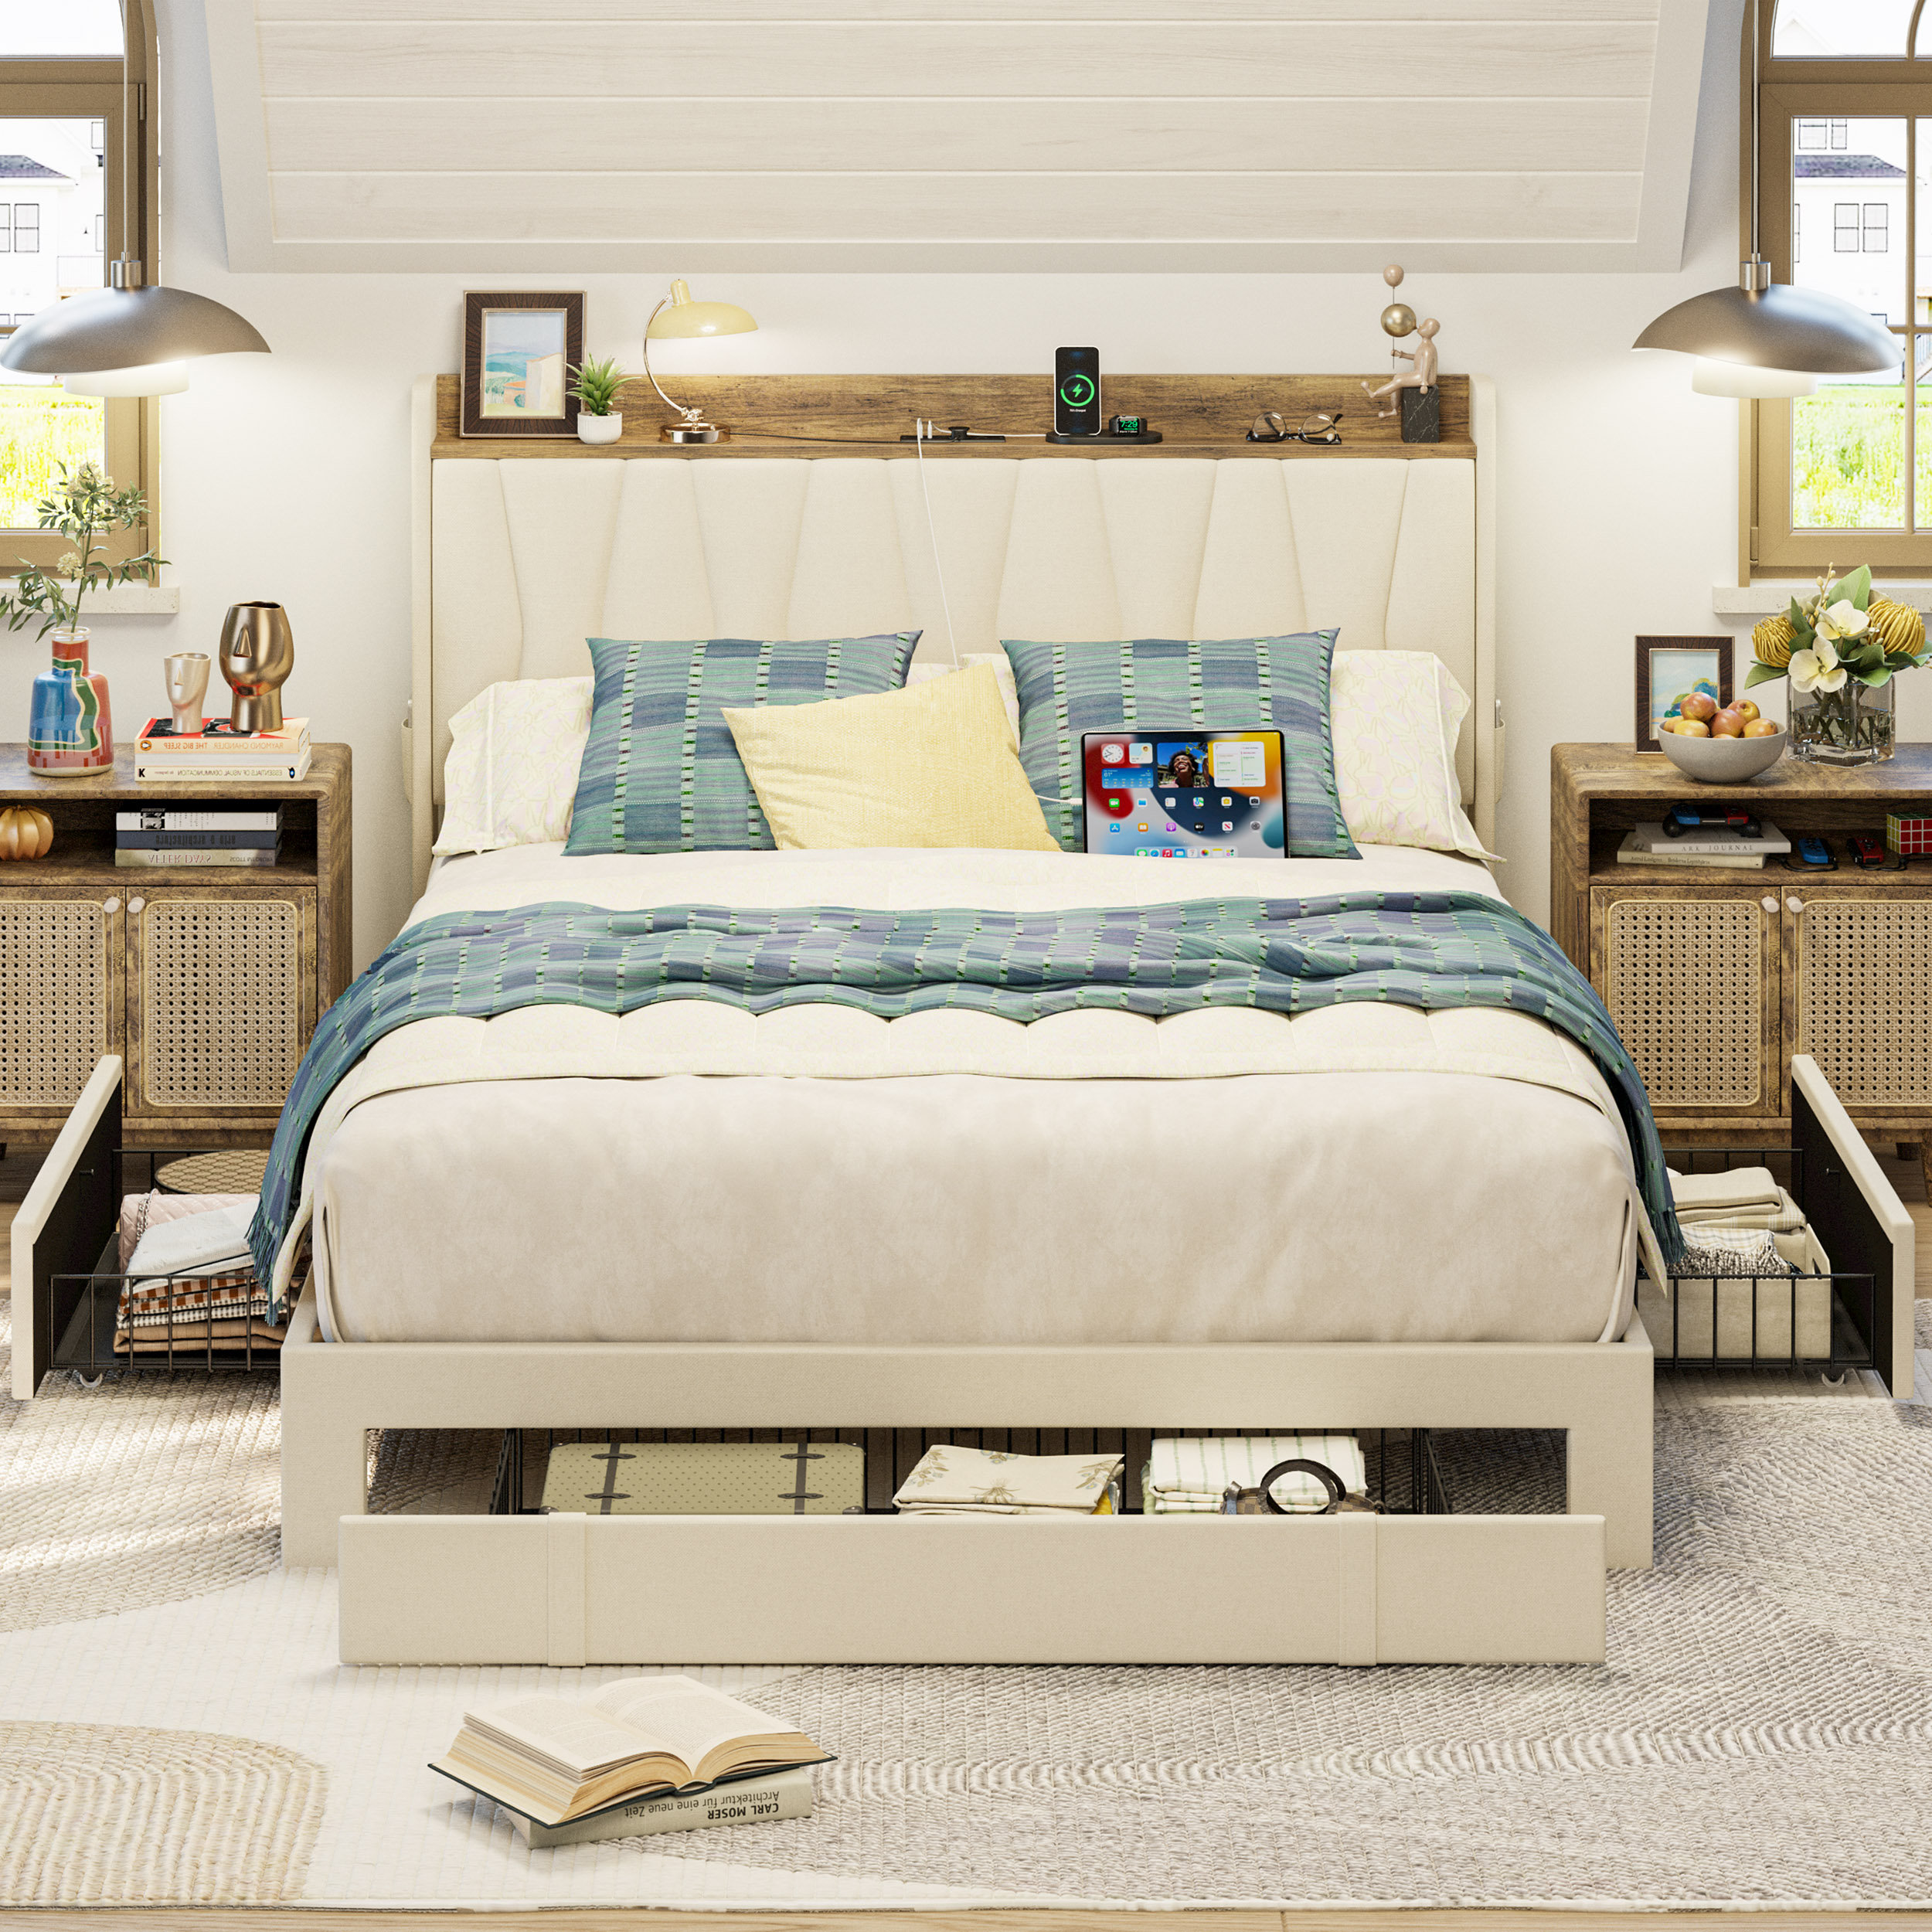 Ivy Bronx Upholstered Bed Frame with 3 Drawers, Bed with Storage